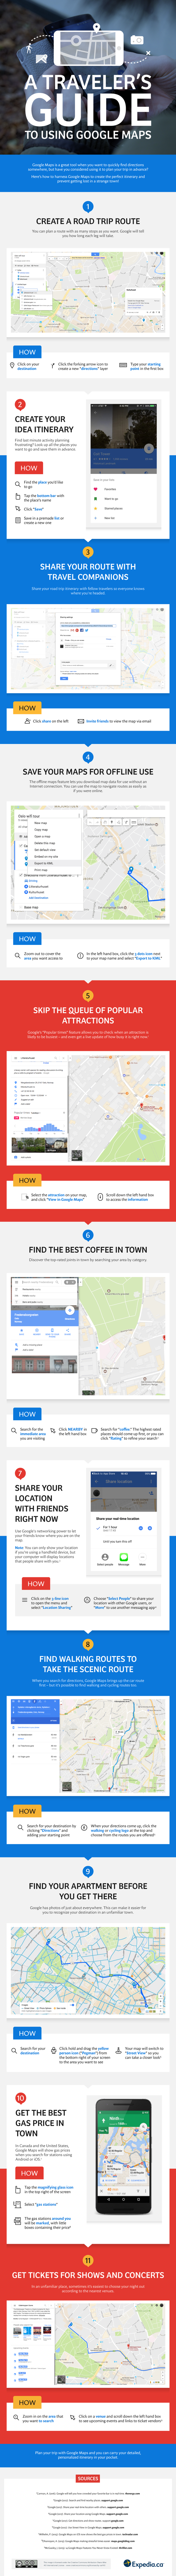 how to use google maps infographic